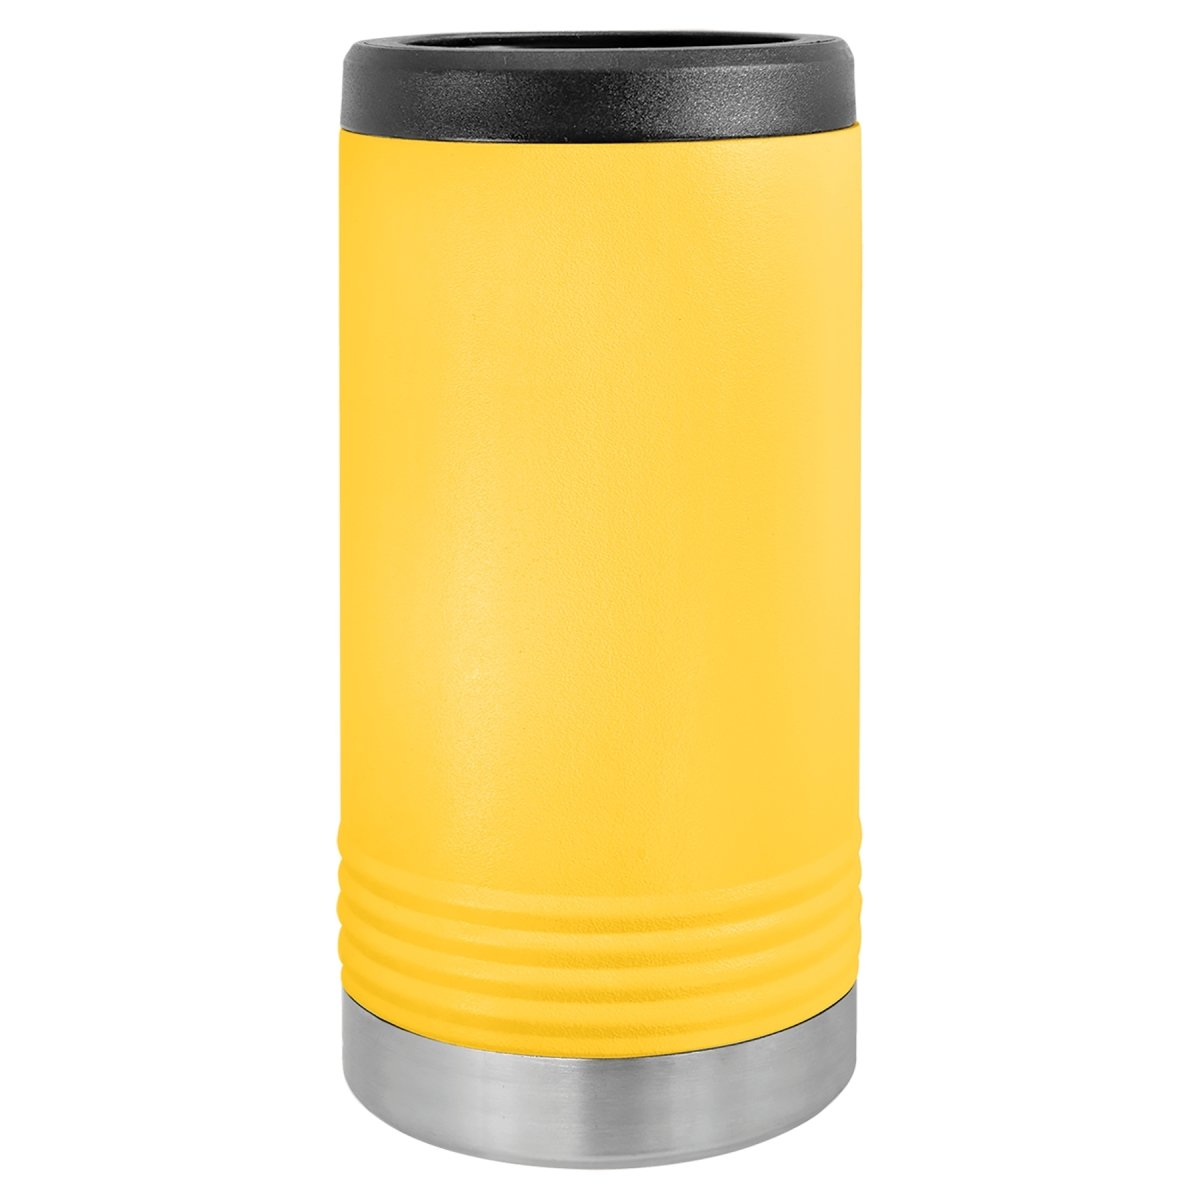 Slim Stainless Steel Beverage Holders for Skinny Cans - The Luua Company